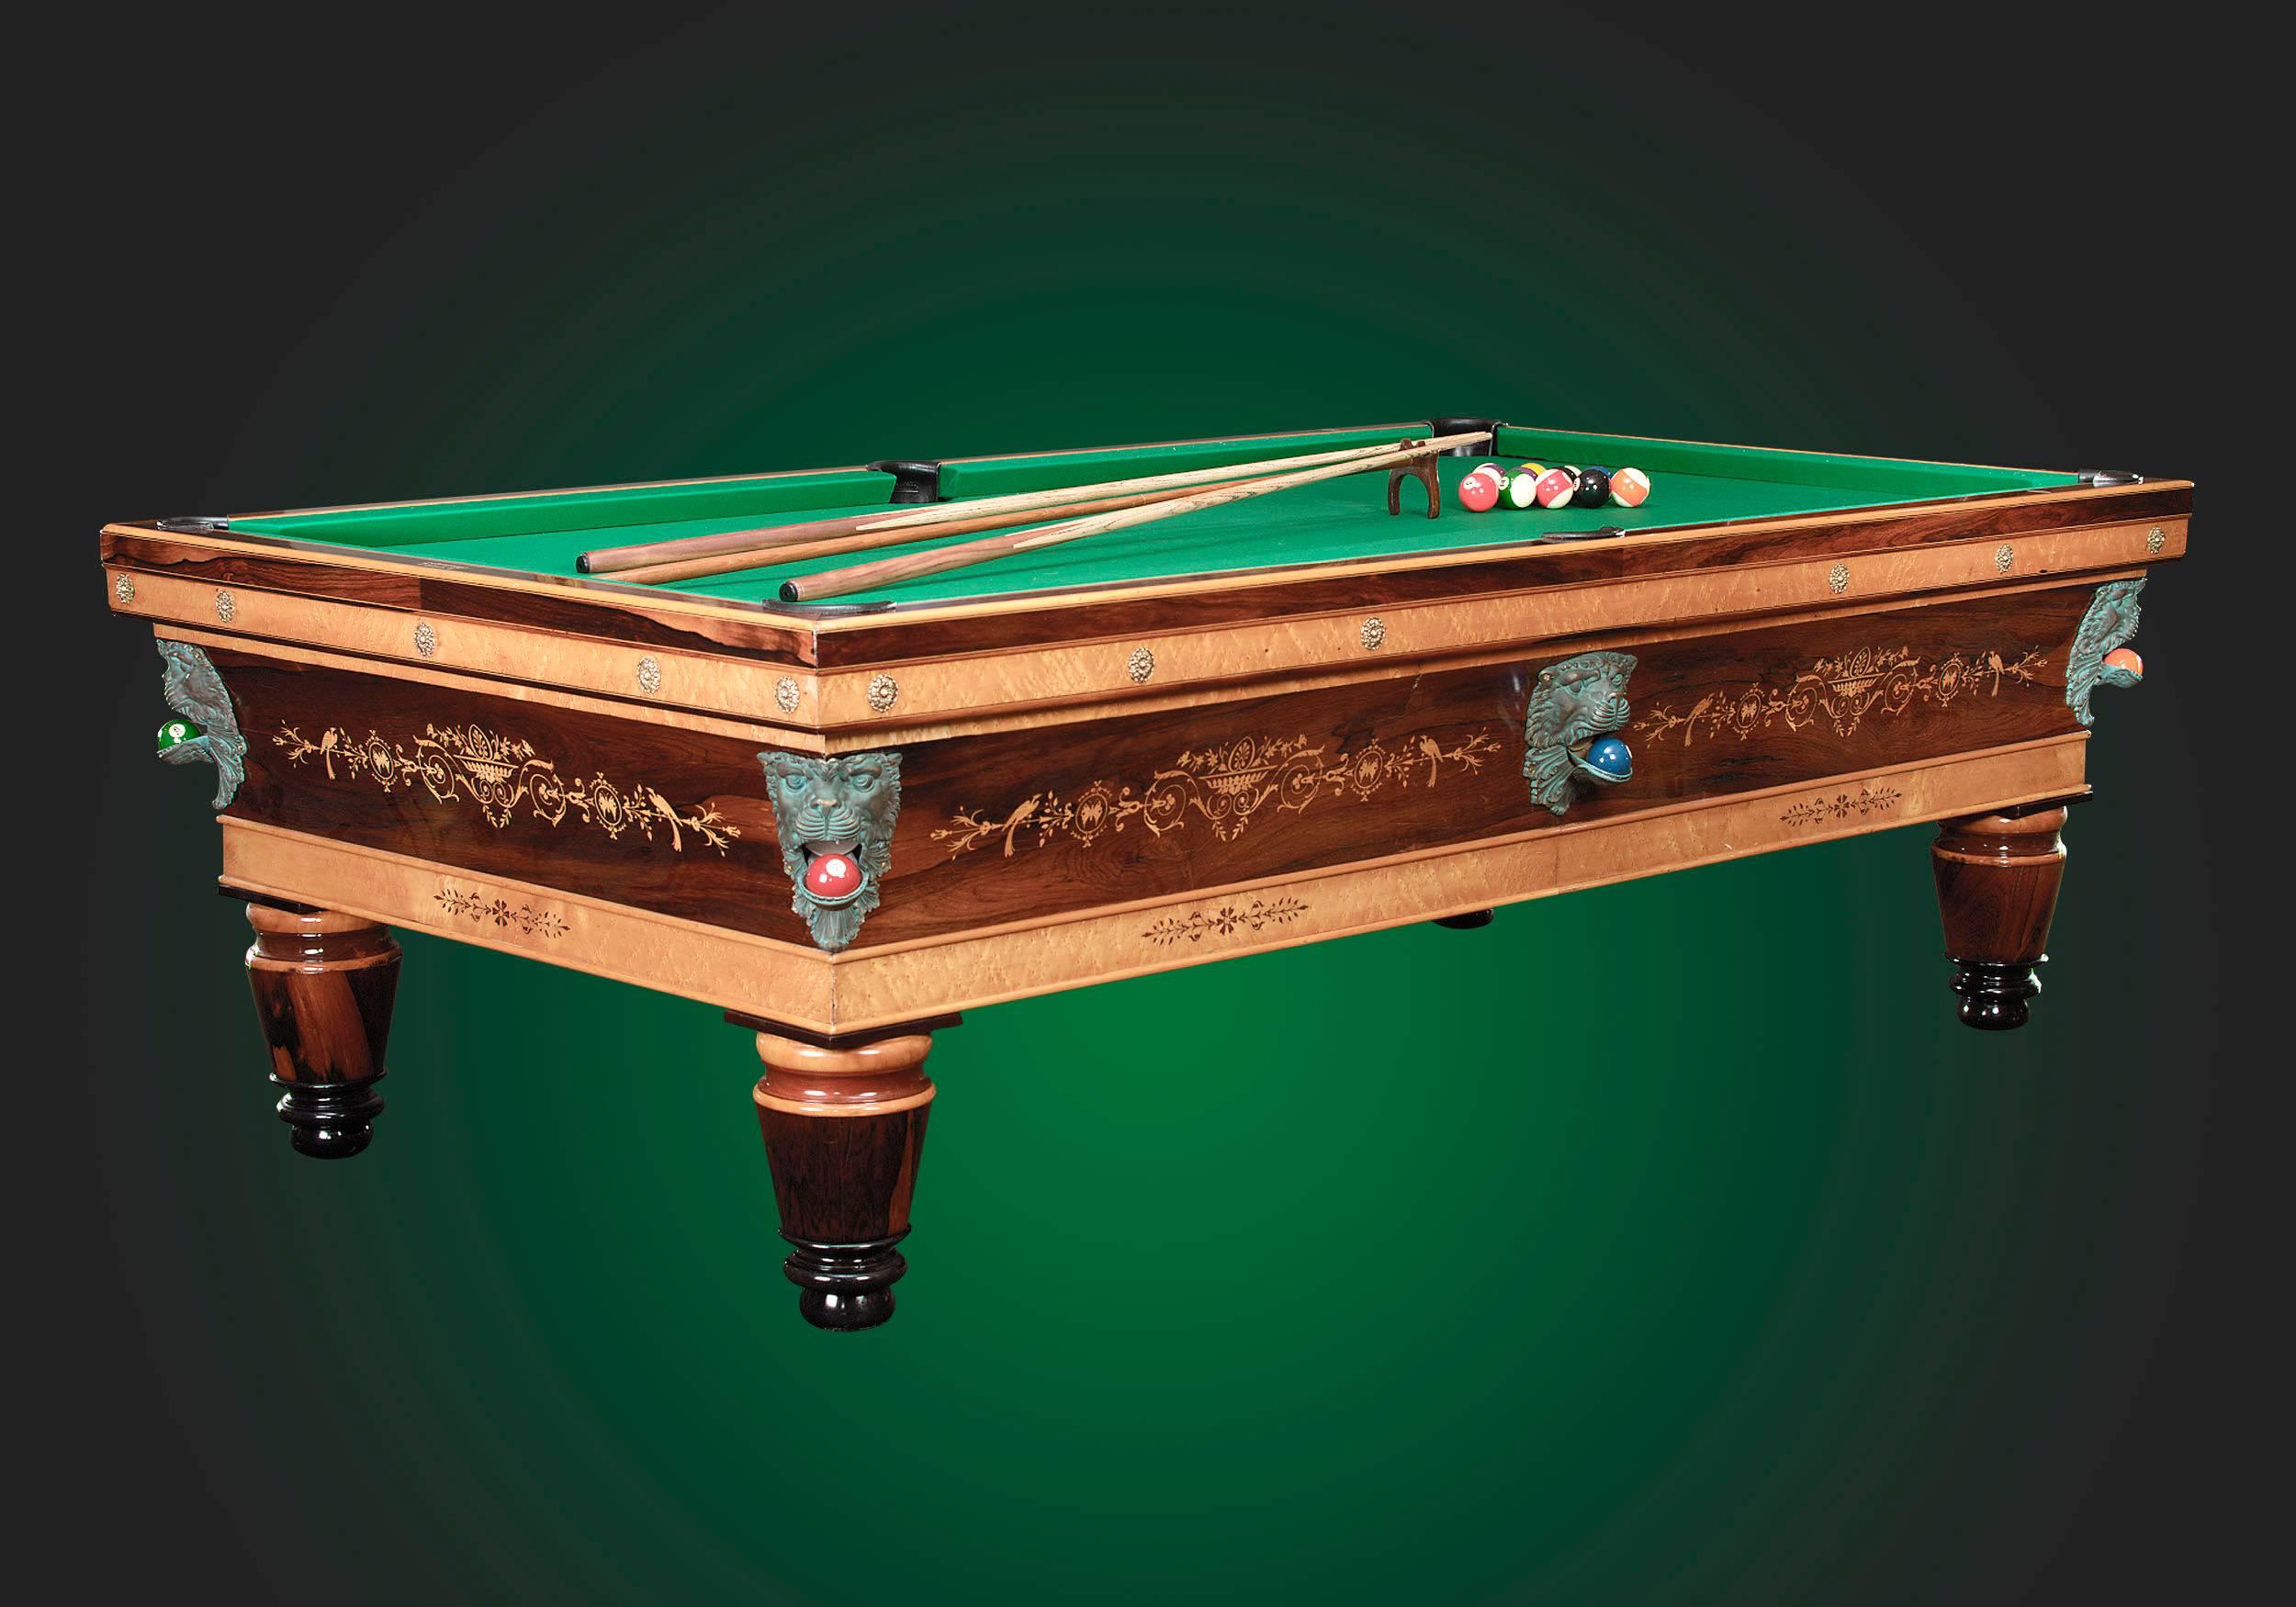 This exquisite Charles X billiard table is an early example of the fine billiard tables produced by the Chevillotte firm of Orleans, France. The table is crafted of rosewood and bird’s eye maple with exotic, intricate wood inlay and adorned with